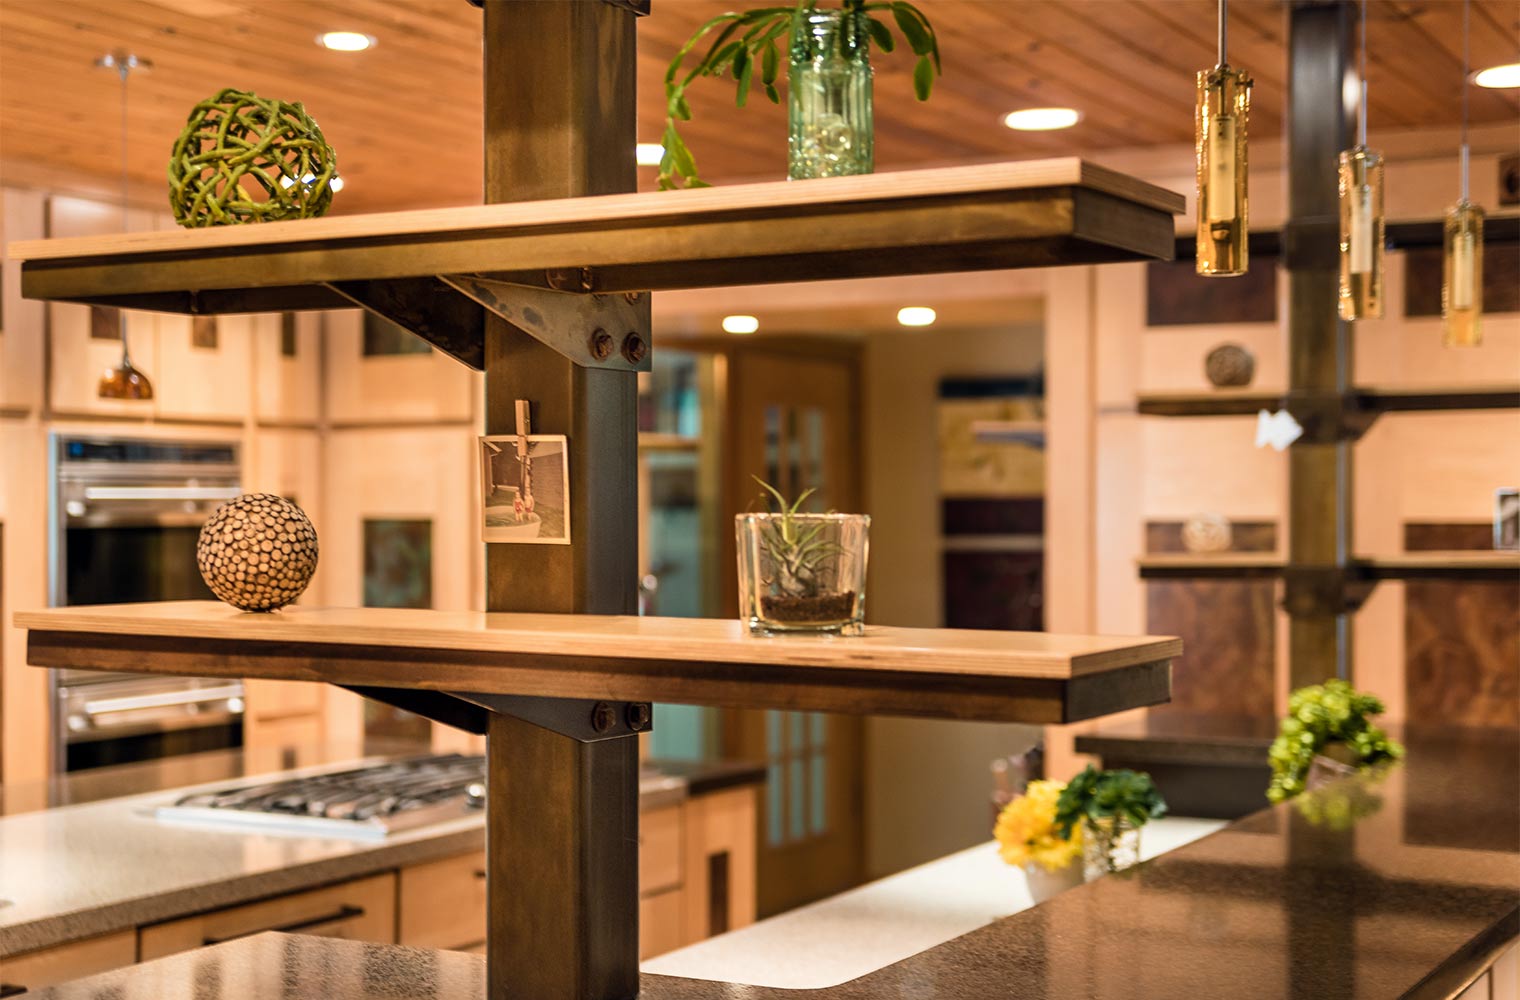 steel and maple shelves extend from the island to the wood ceiling in this Johnston kitchen by remodeler Silent Rivers